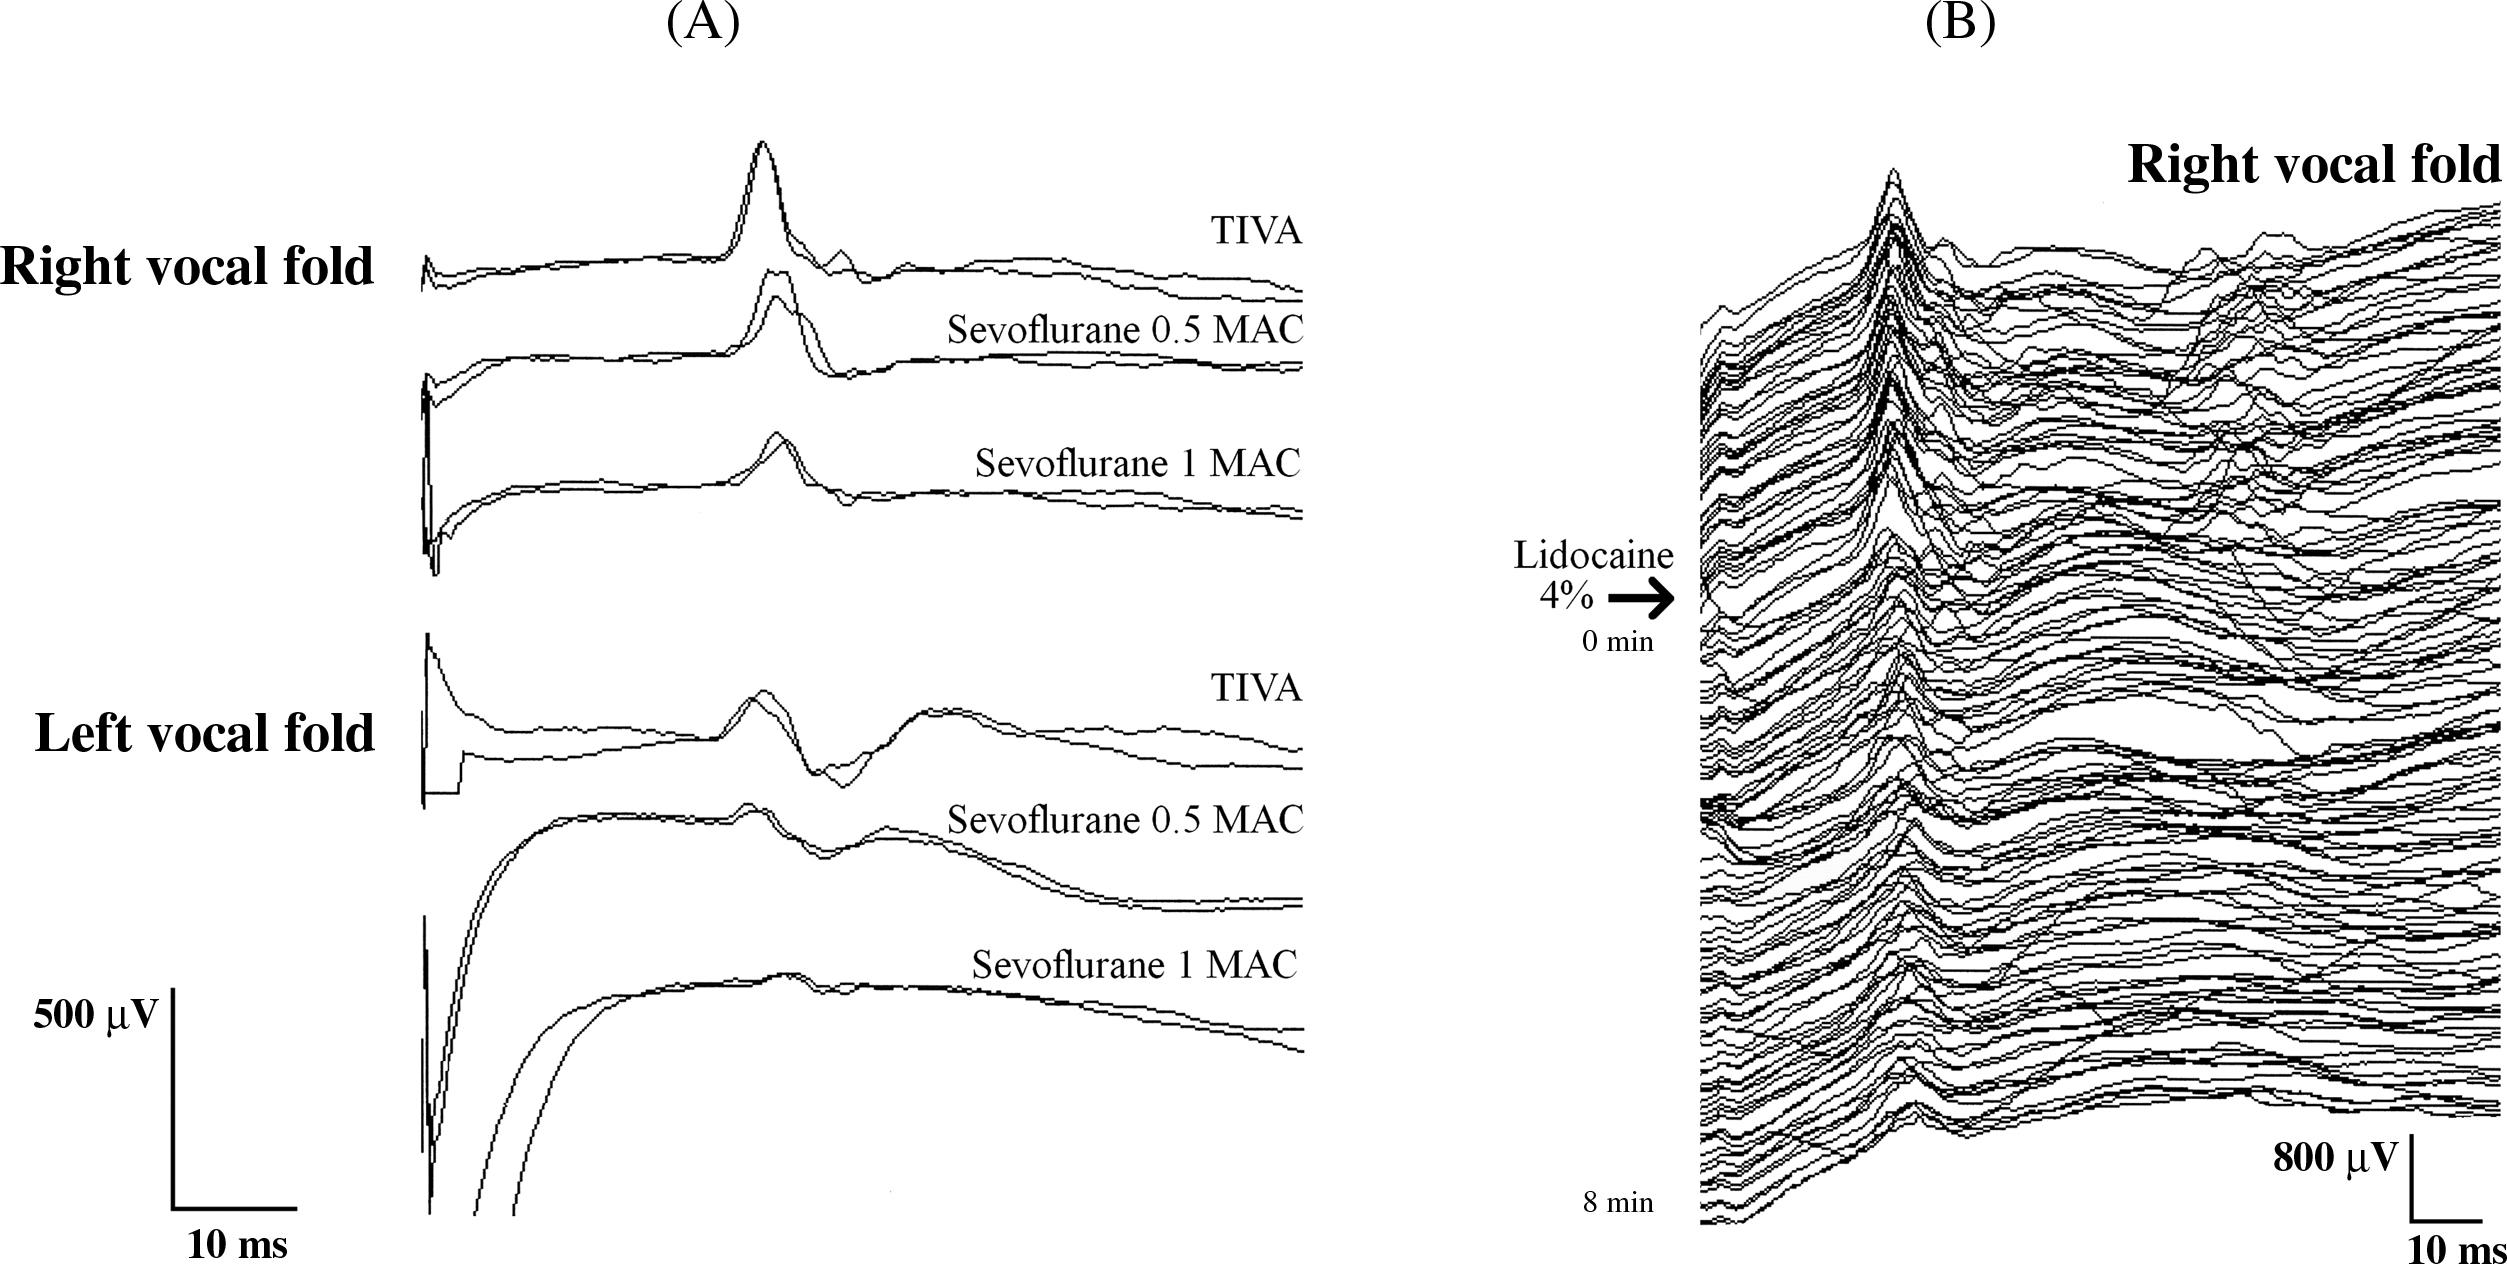 Figure 15.3, (A) Effect of sevoflurane at different mean alveolar concentrations (MAC) compared to total intravenous anesthesia (TIVA) to the laryngeal adductor reflex behavior. (B) Effect of lidocaine 4% topically applied to the laryngeal mucosa. MAC , mean alveolar concentrations.